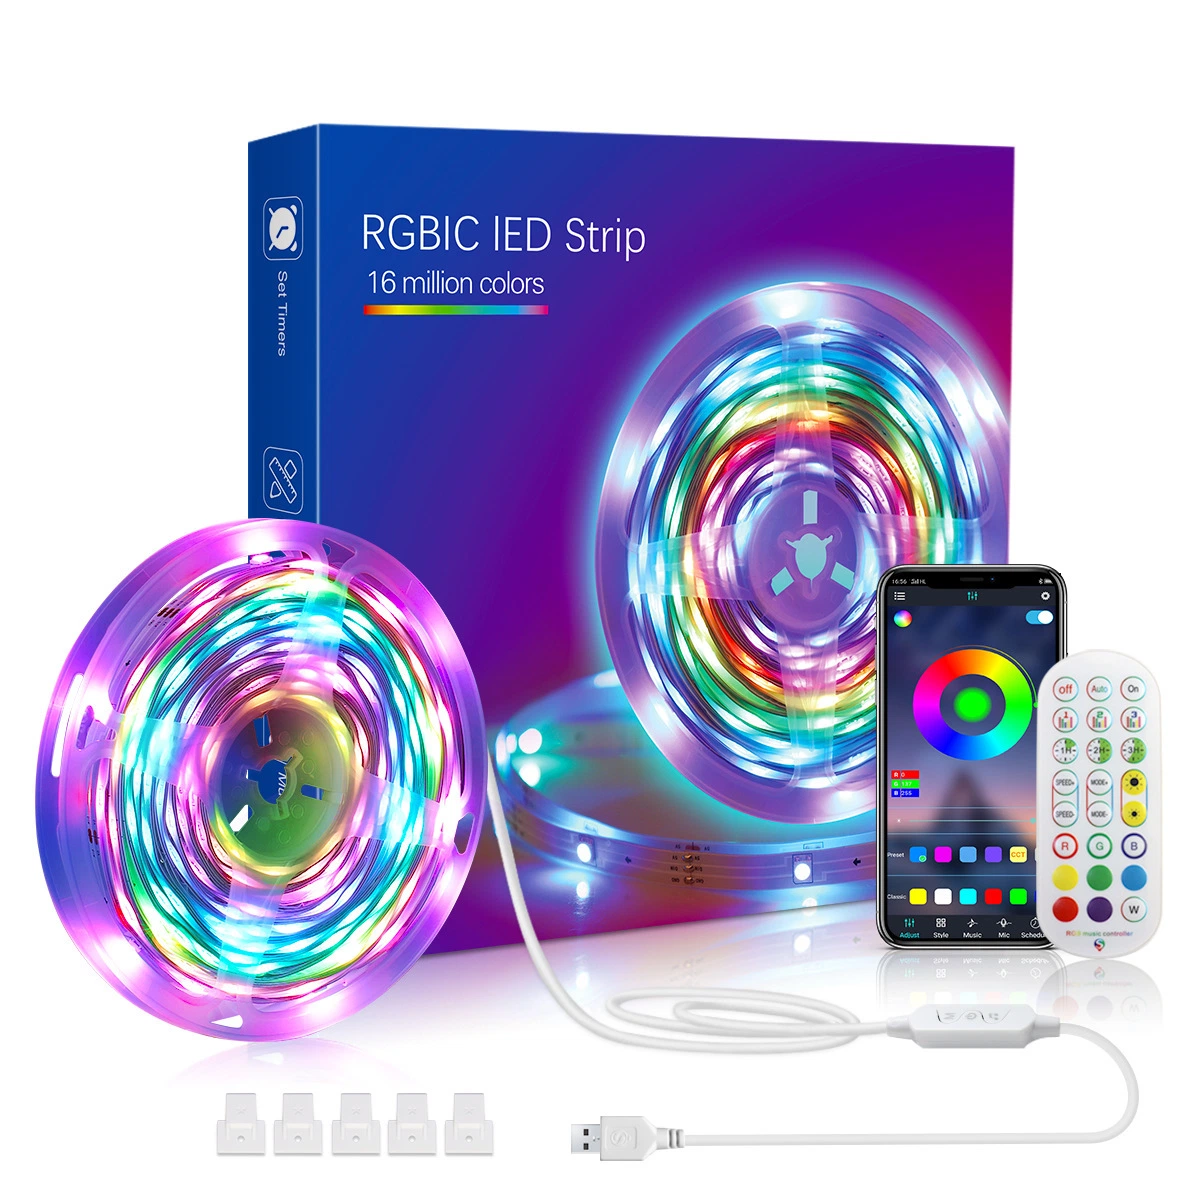 LED Lights for Bedroom, LED Chasing Effect Dream Icrgb Light Strip, USB Smart Light Strips APP Control Music Sync Color Changing LED Strip Lights with Remote